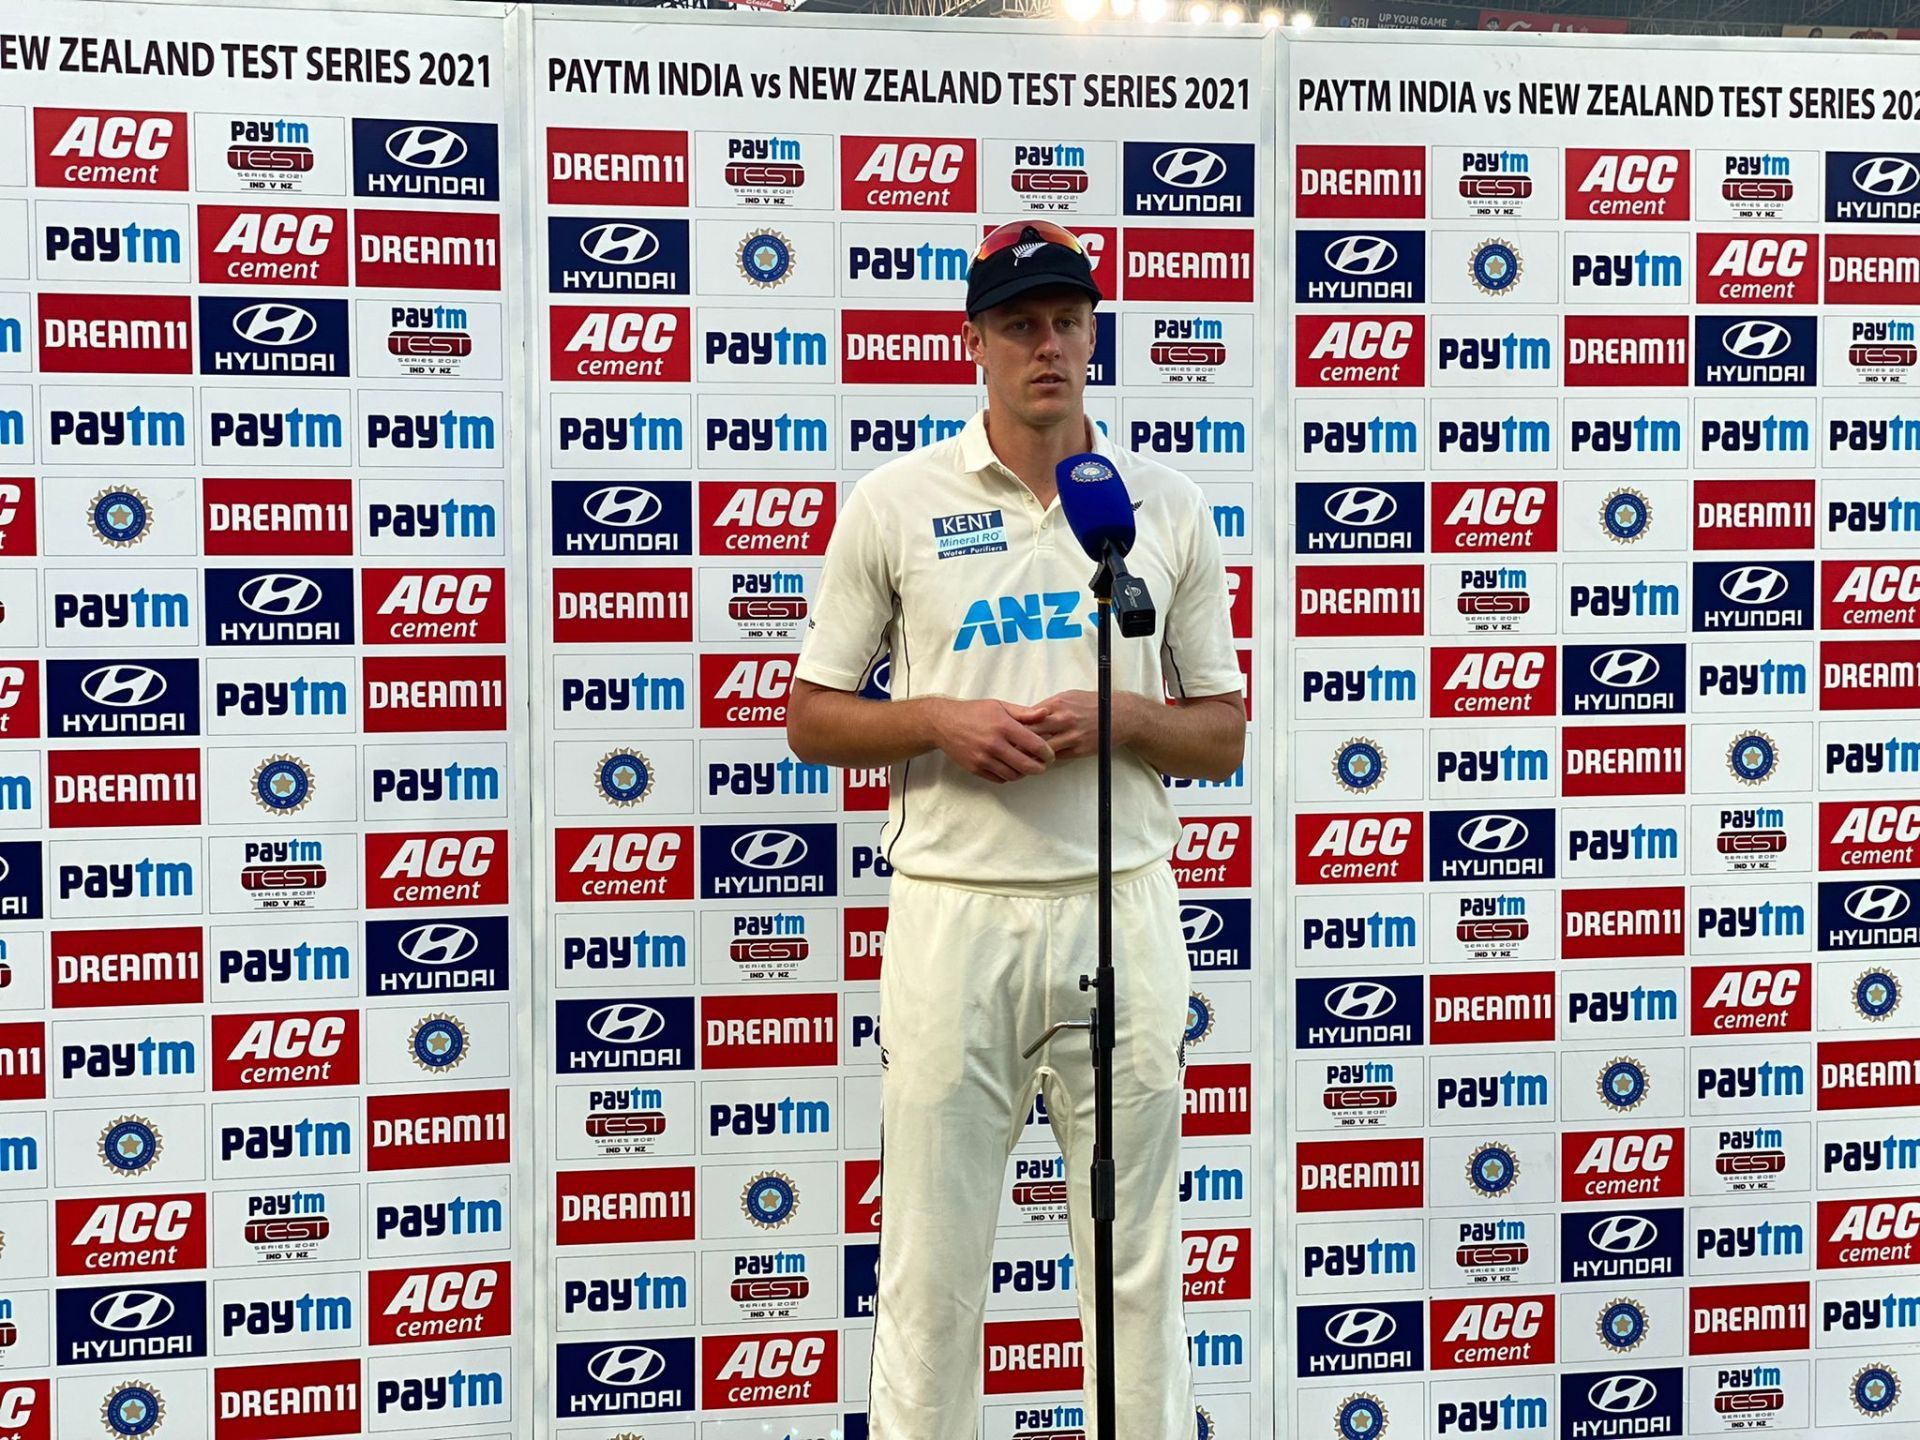 Kyle Jamieson was the pick of the bowlers for New Zealand on day 1 of the first Test (Credit: BCCI)